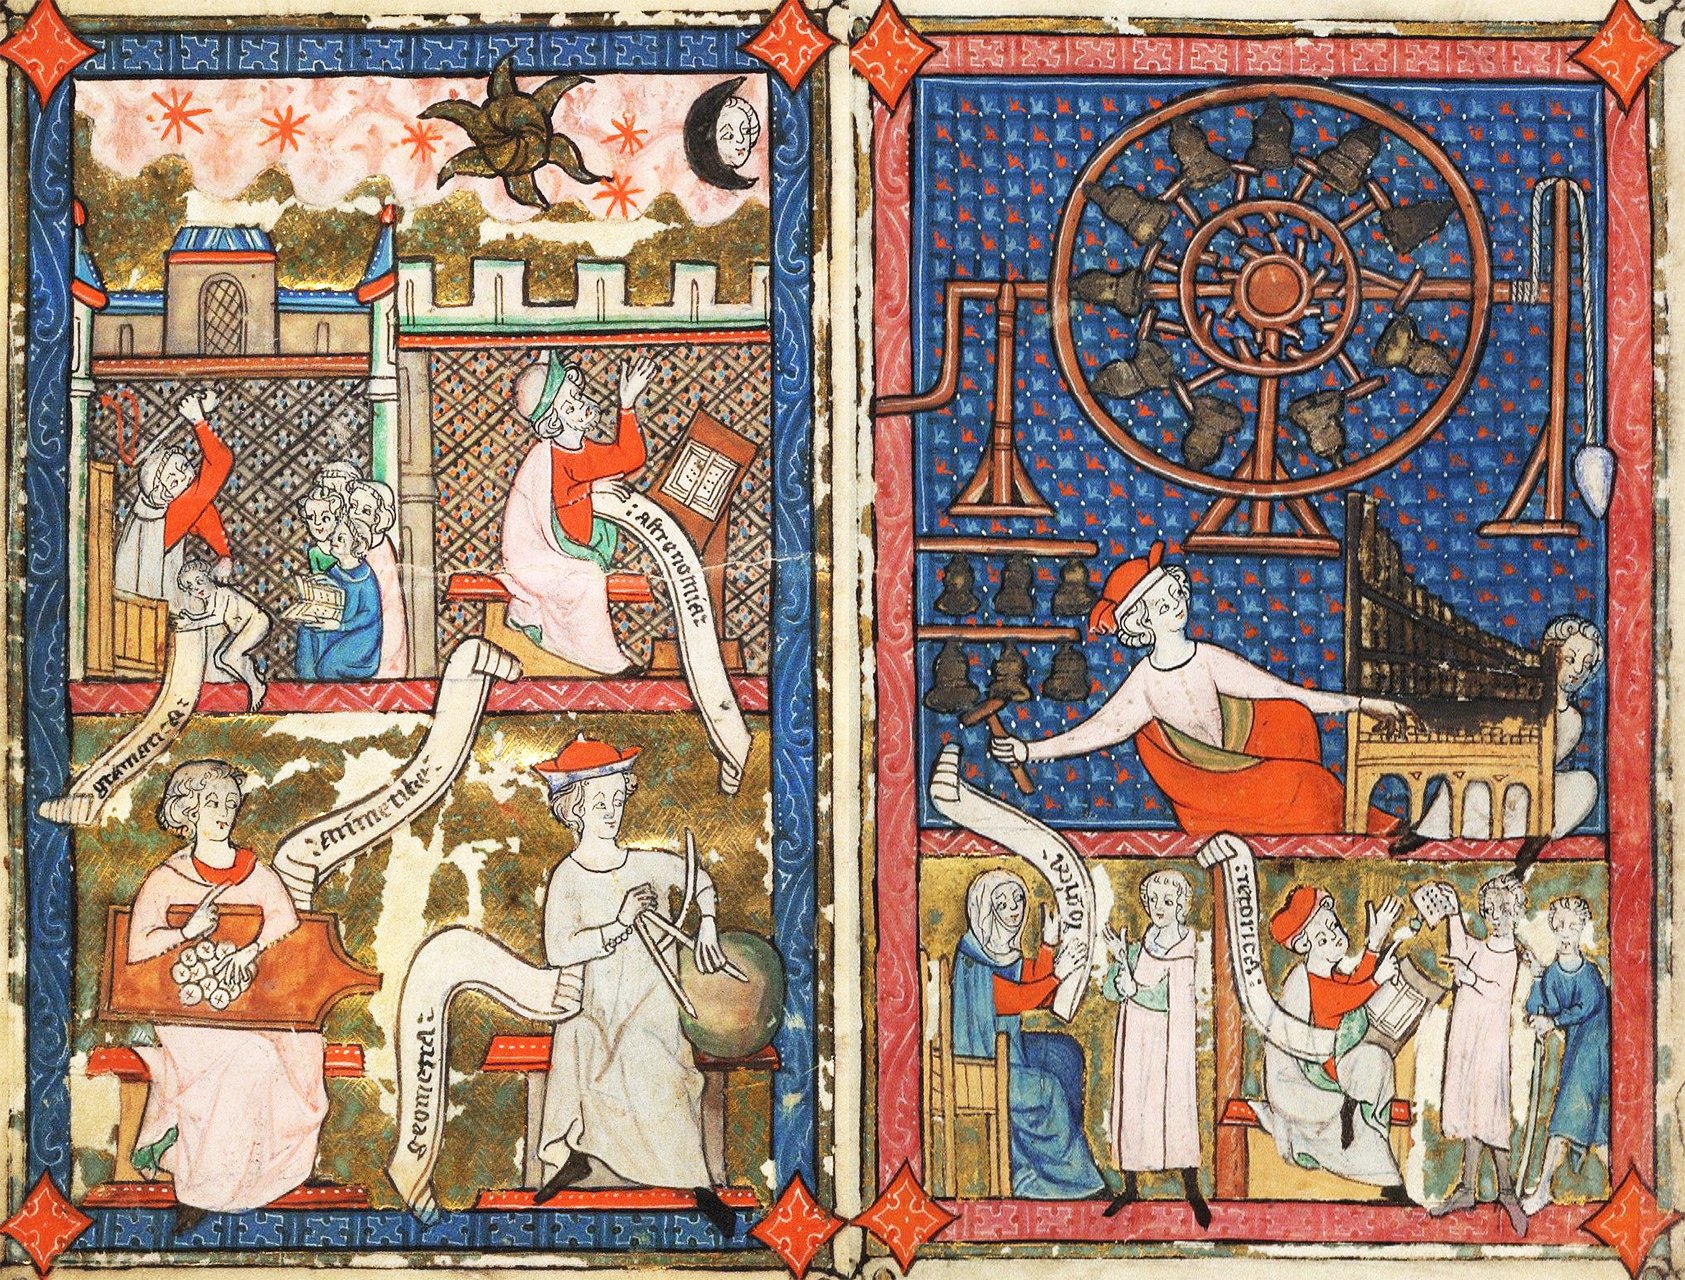 On the first page, at the top left, Grammar is depicted punishing a student, with four other students appearing entertained by the scene. To the right, Astronomy is represented by an astronomer observing the sky, noting the Moon, Sun, and stars. Below, Arithmetic is shown with an abacus, and Geometry with a pair of compasses. On the second page, at the top, Music is depicted playing two instruments: her left hand is on a keyboard with assistance from a boy, and her right hand is ringing a bell. Below, on the left, Logic is teaching a student, while on the right, Rhetoric, with crossed legs, instructs two students.